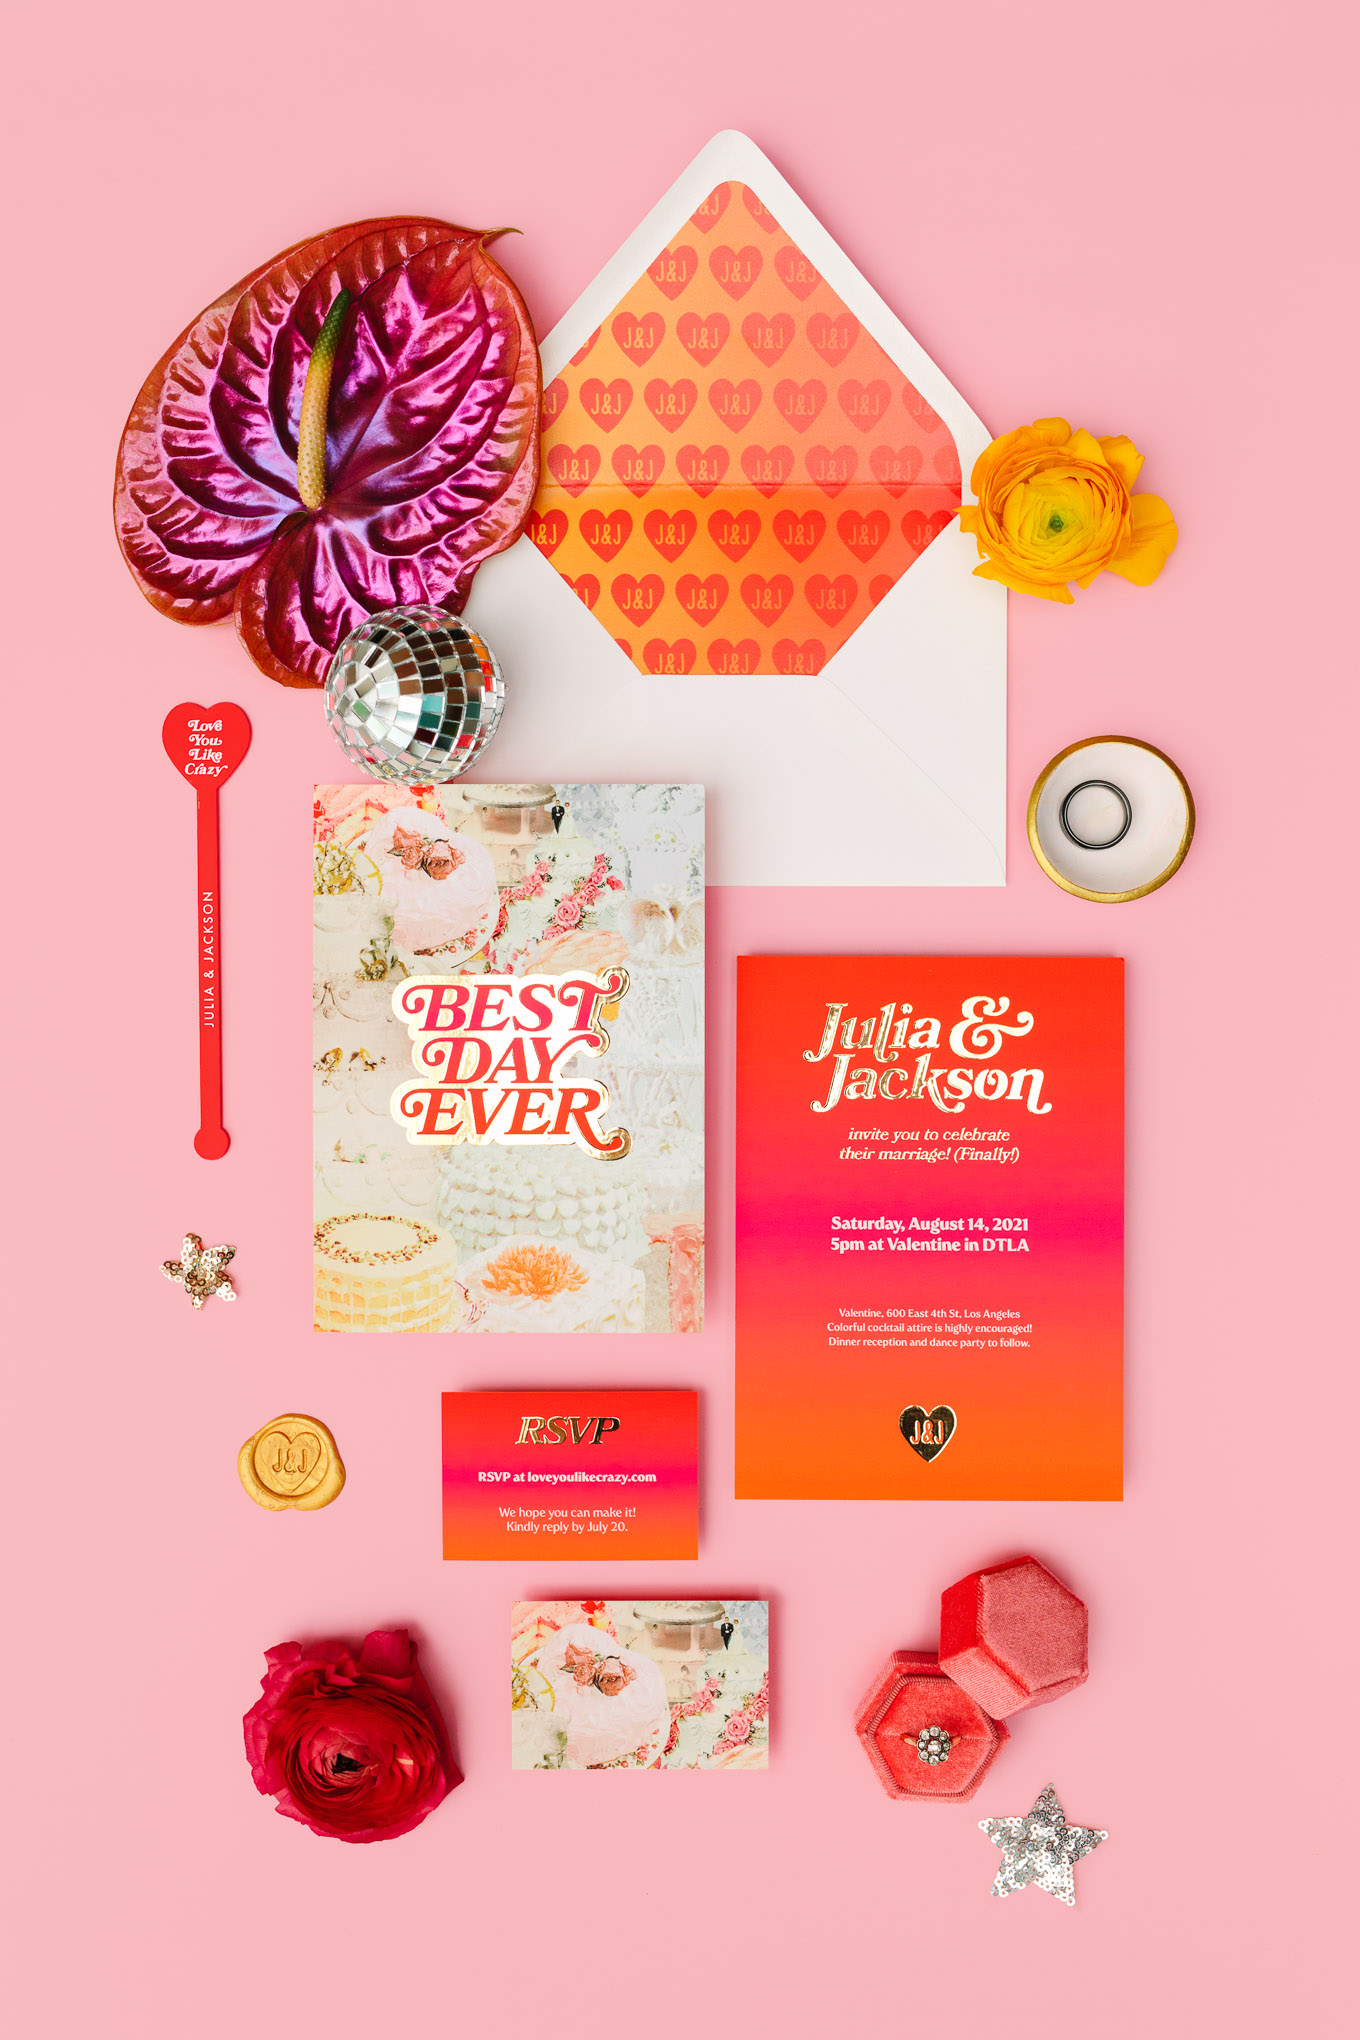 Colorful invitation suite designed by bride Julia Walck | Colorful Downtown Los Angeles Valentine Wedding | Los Angeles wedding photographer | #losangeleswedding #colorfulwedding #DTLA #valentinedtla   Source: Mary Costa Photography | Los Angeles